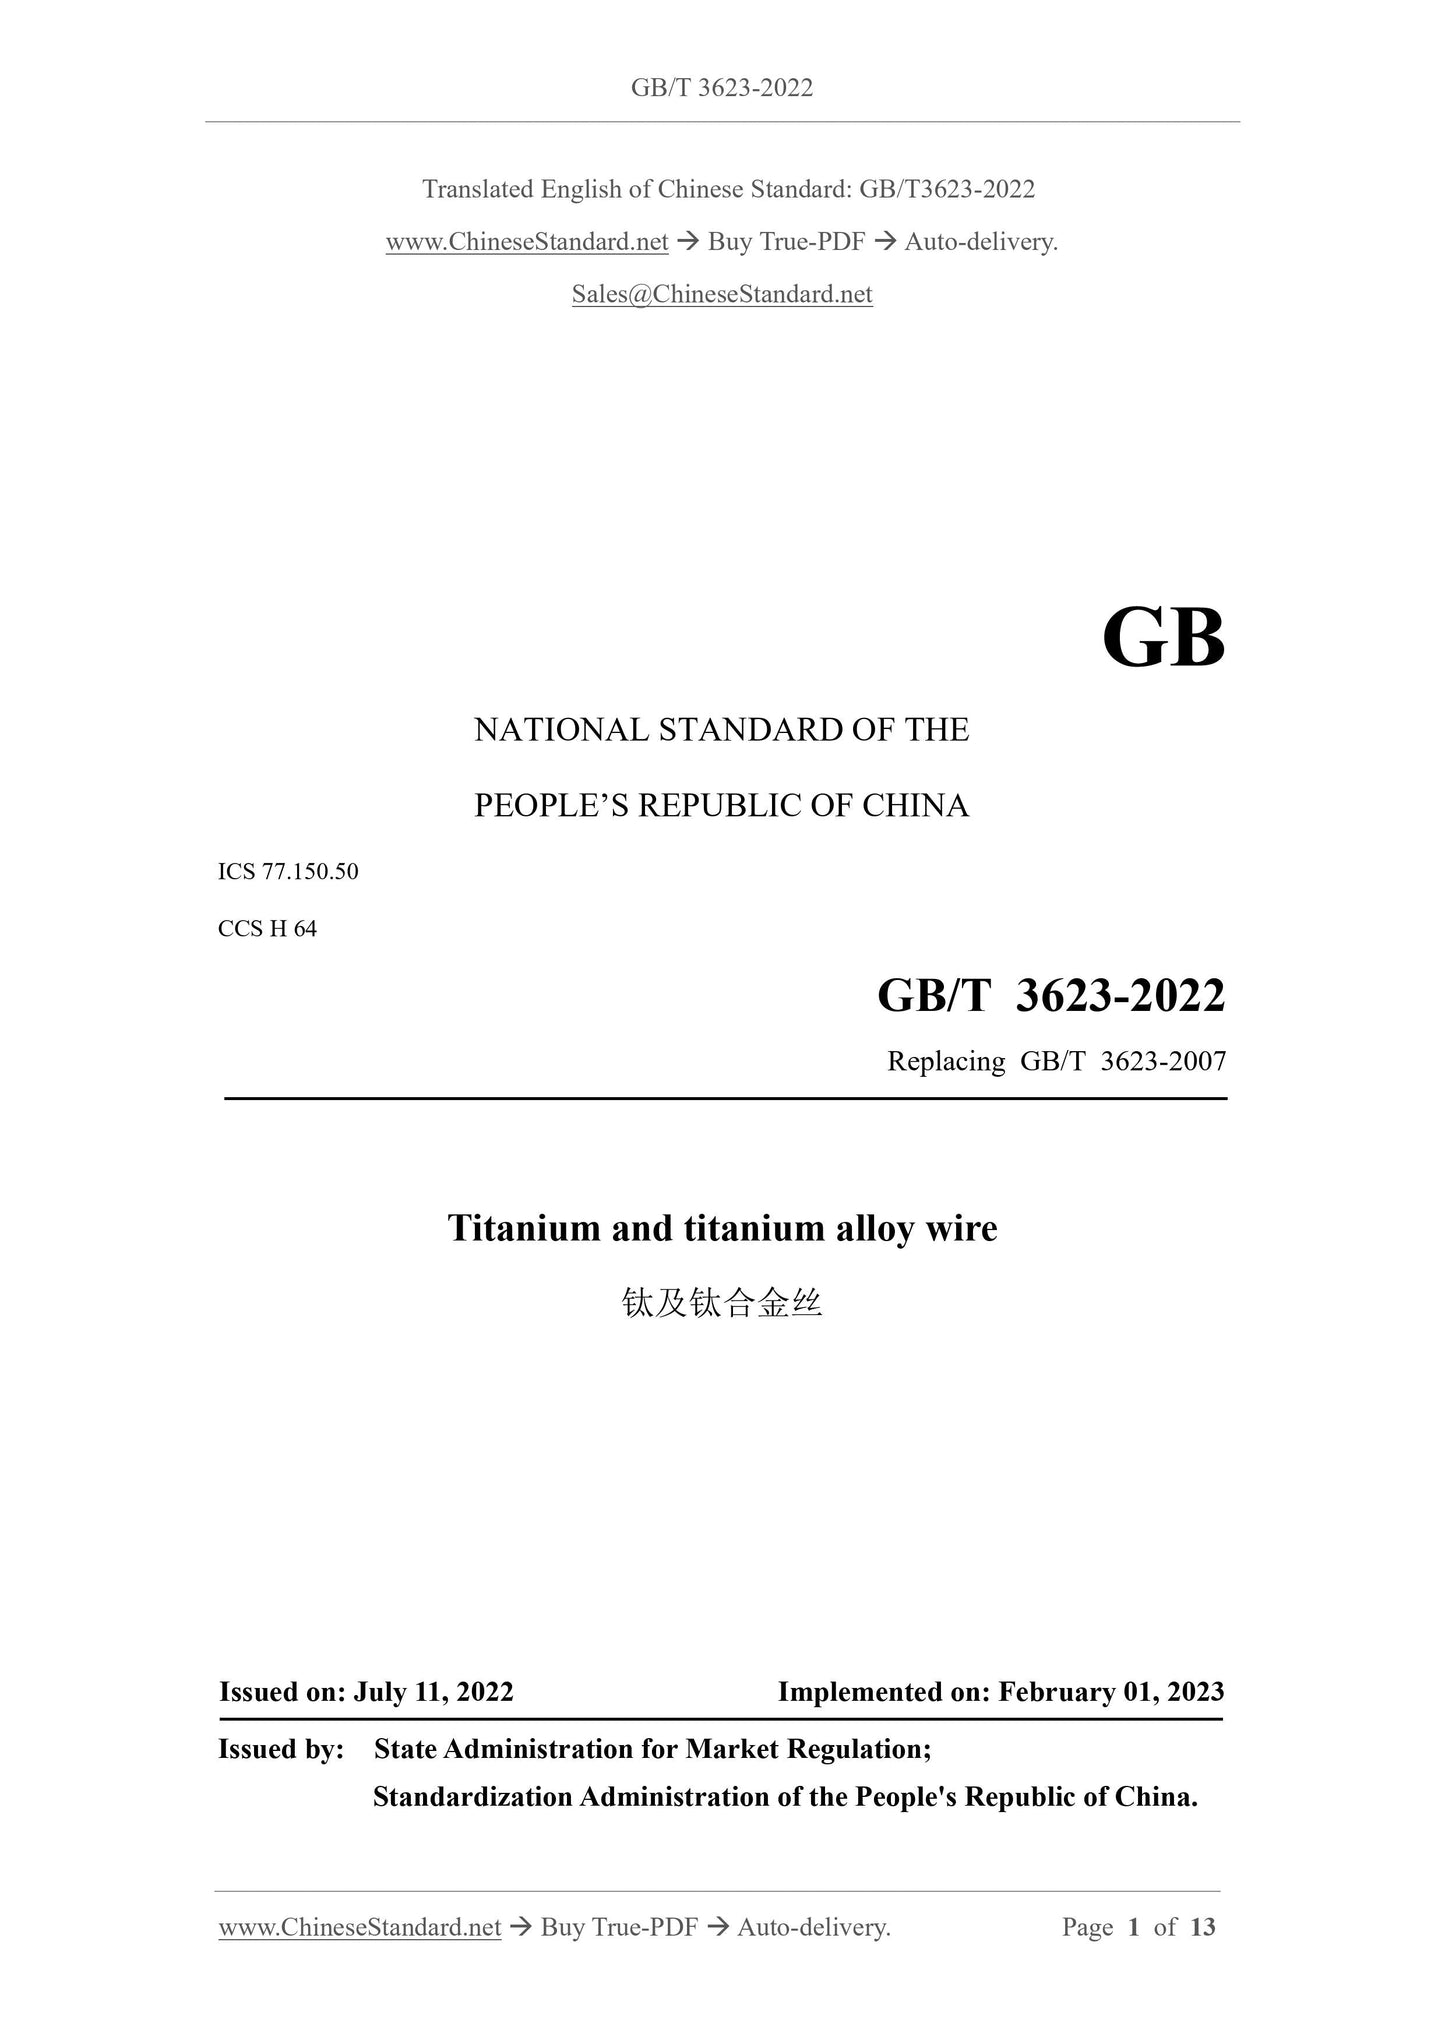 GB/T 3623-2022 Page 1